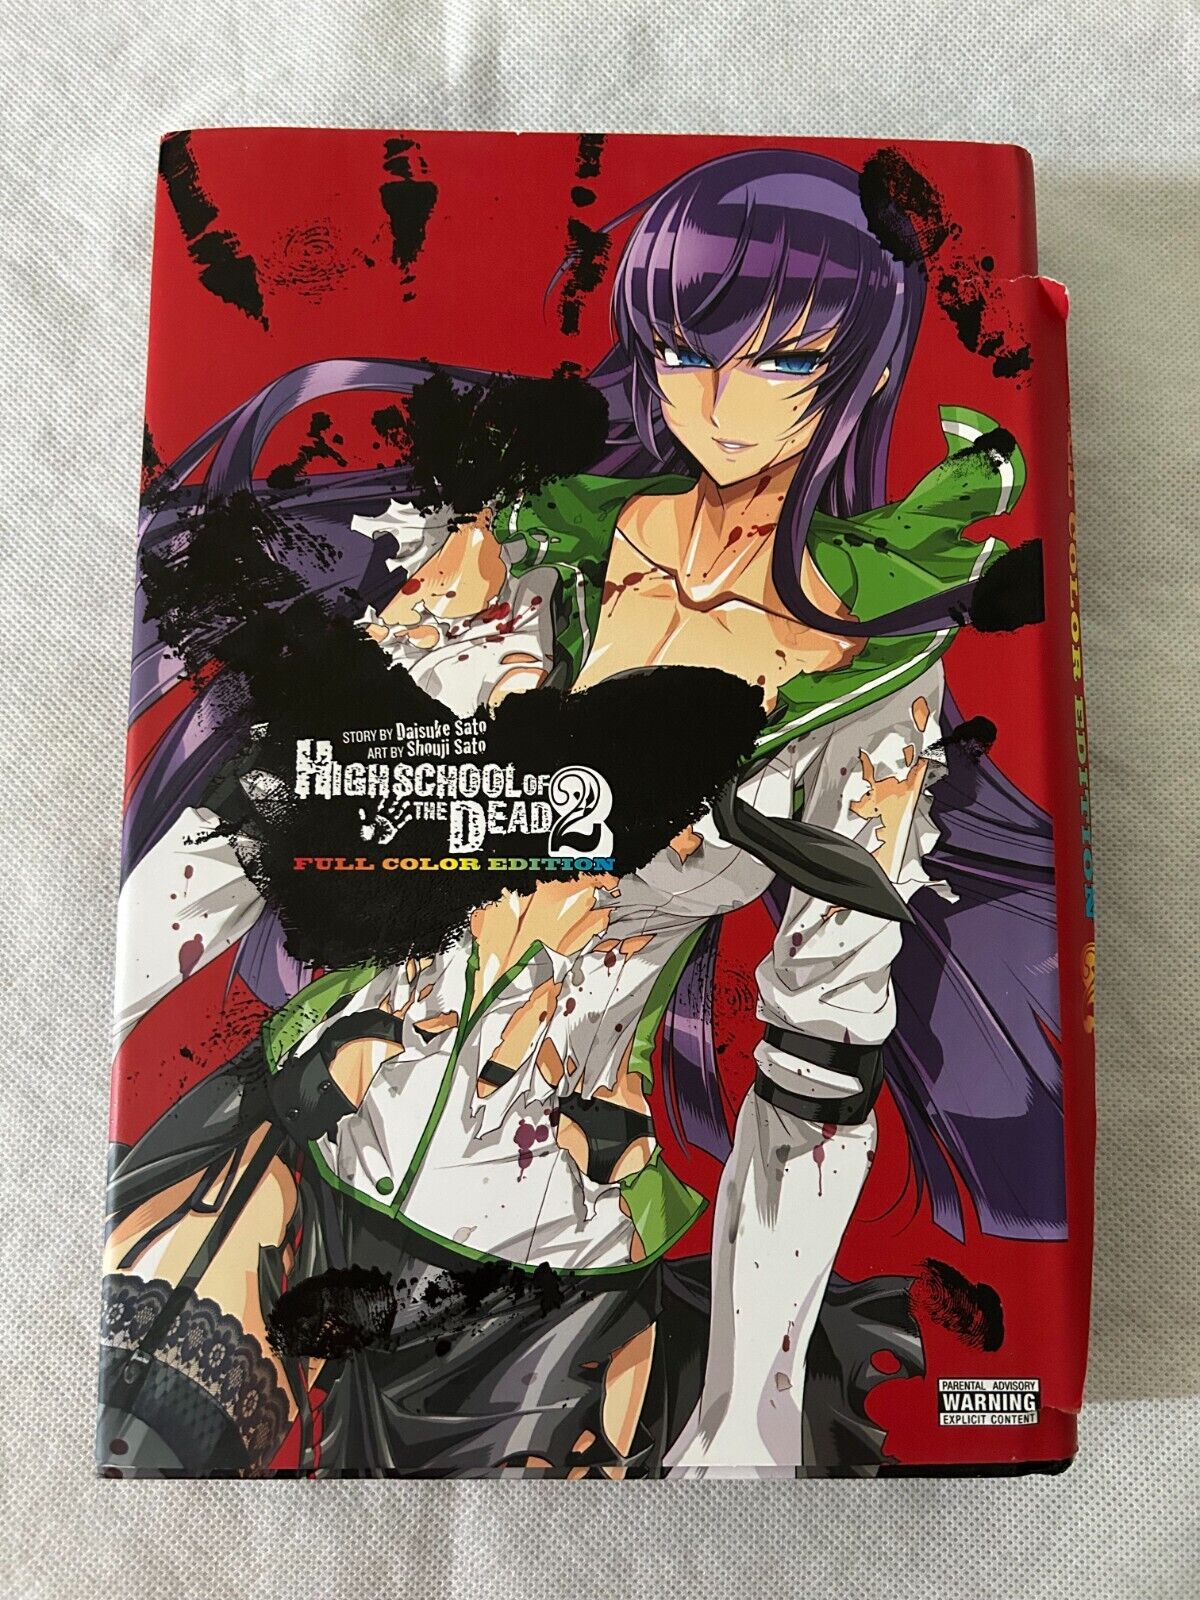 Highschool of the Dead Color Omnibus, - Hardcover, by Sato Daisuke - Very Good